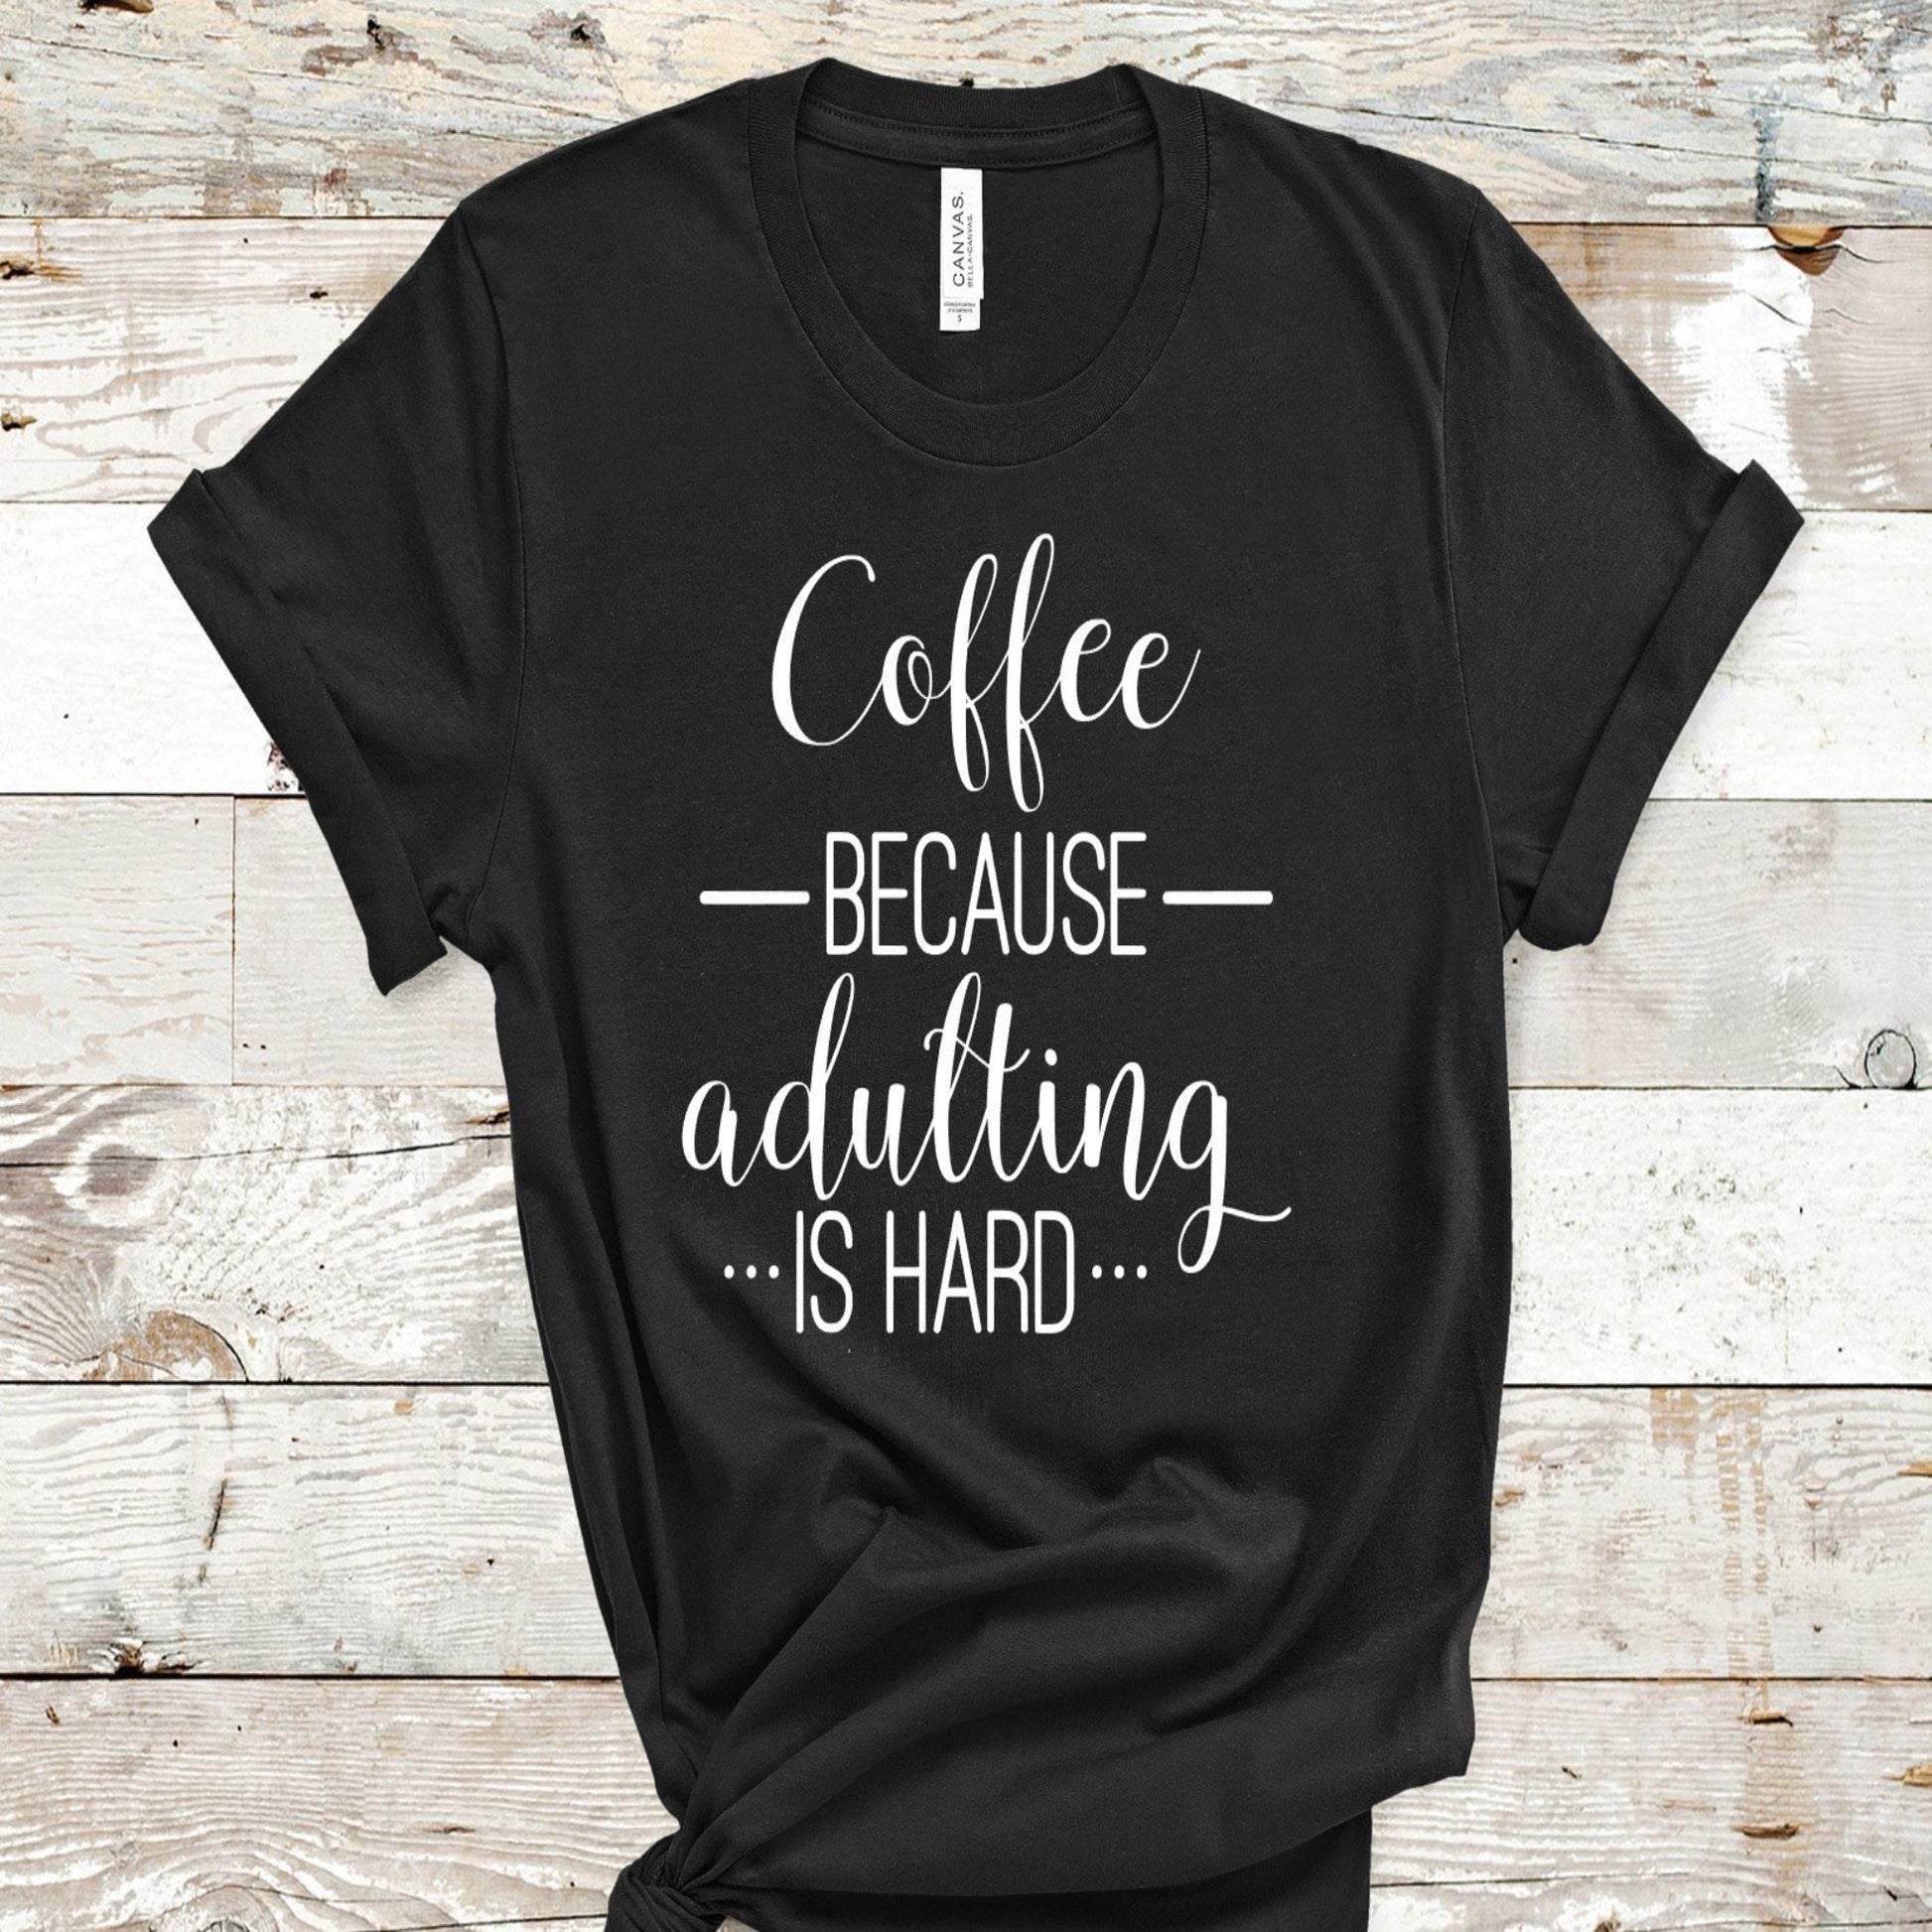 coffee_adulting comfortable shirt casual tshirt specialty tee